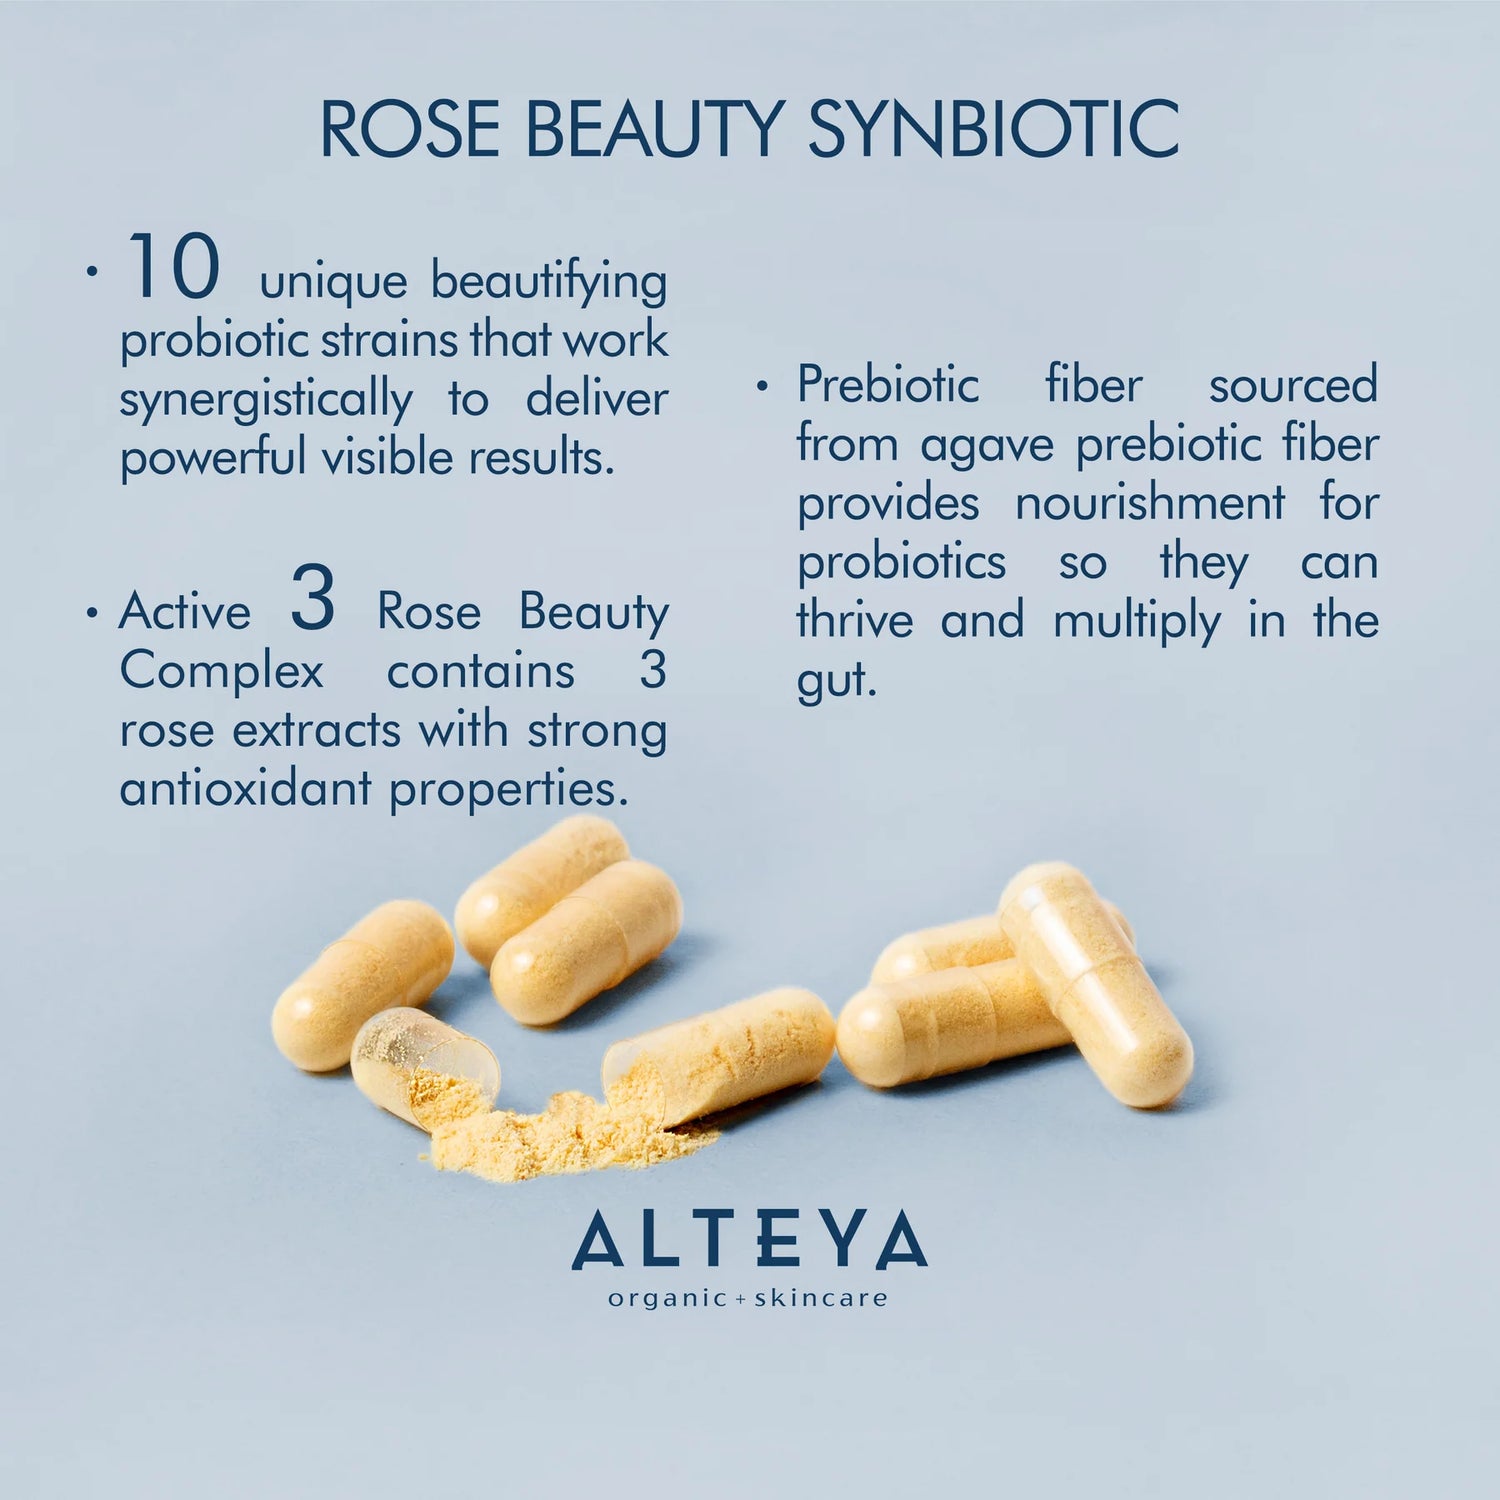 Rose Beauty Prebiotic and Probiotic - Synbiotic Skin &amp; Metabolism Vegan Organic Supplement is a health supplement that promotes skin appearance and gut health. It harnesses the power of organic ingredients to enhance natural beauty from within.